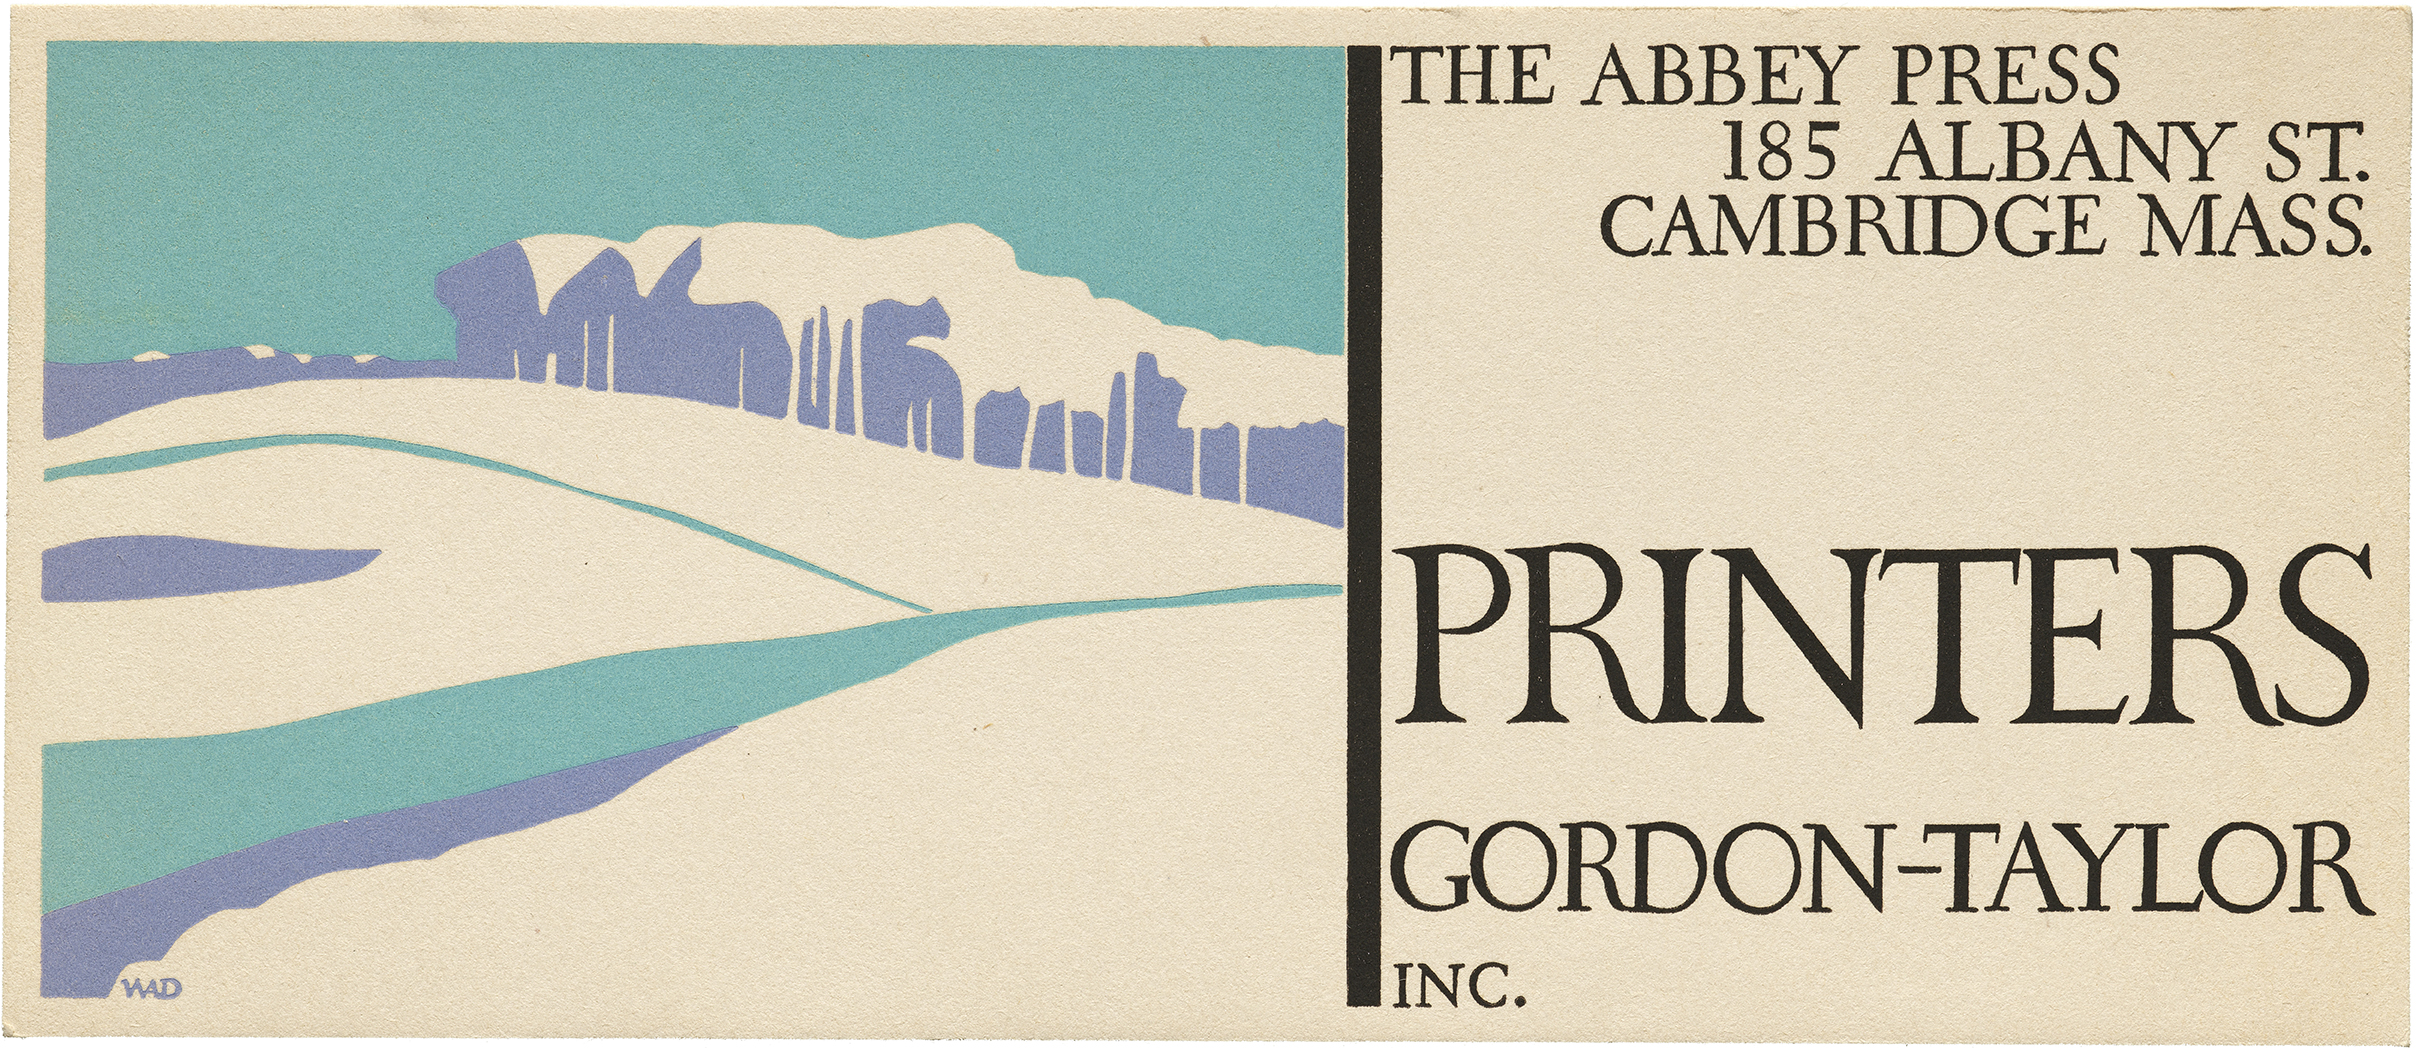  Blotter for Abbey Press, ca. 1930s. Collection of Letterform Archive. 